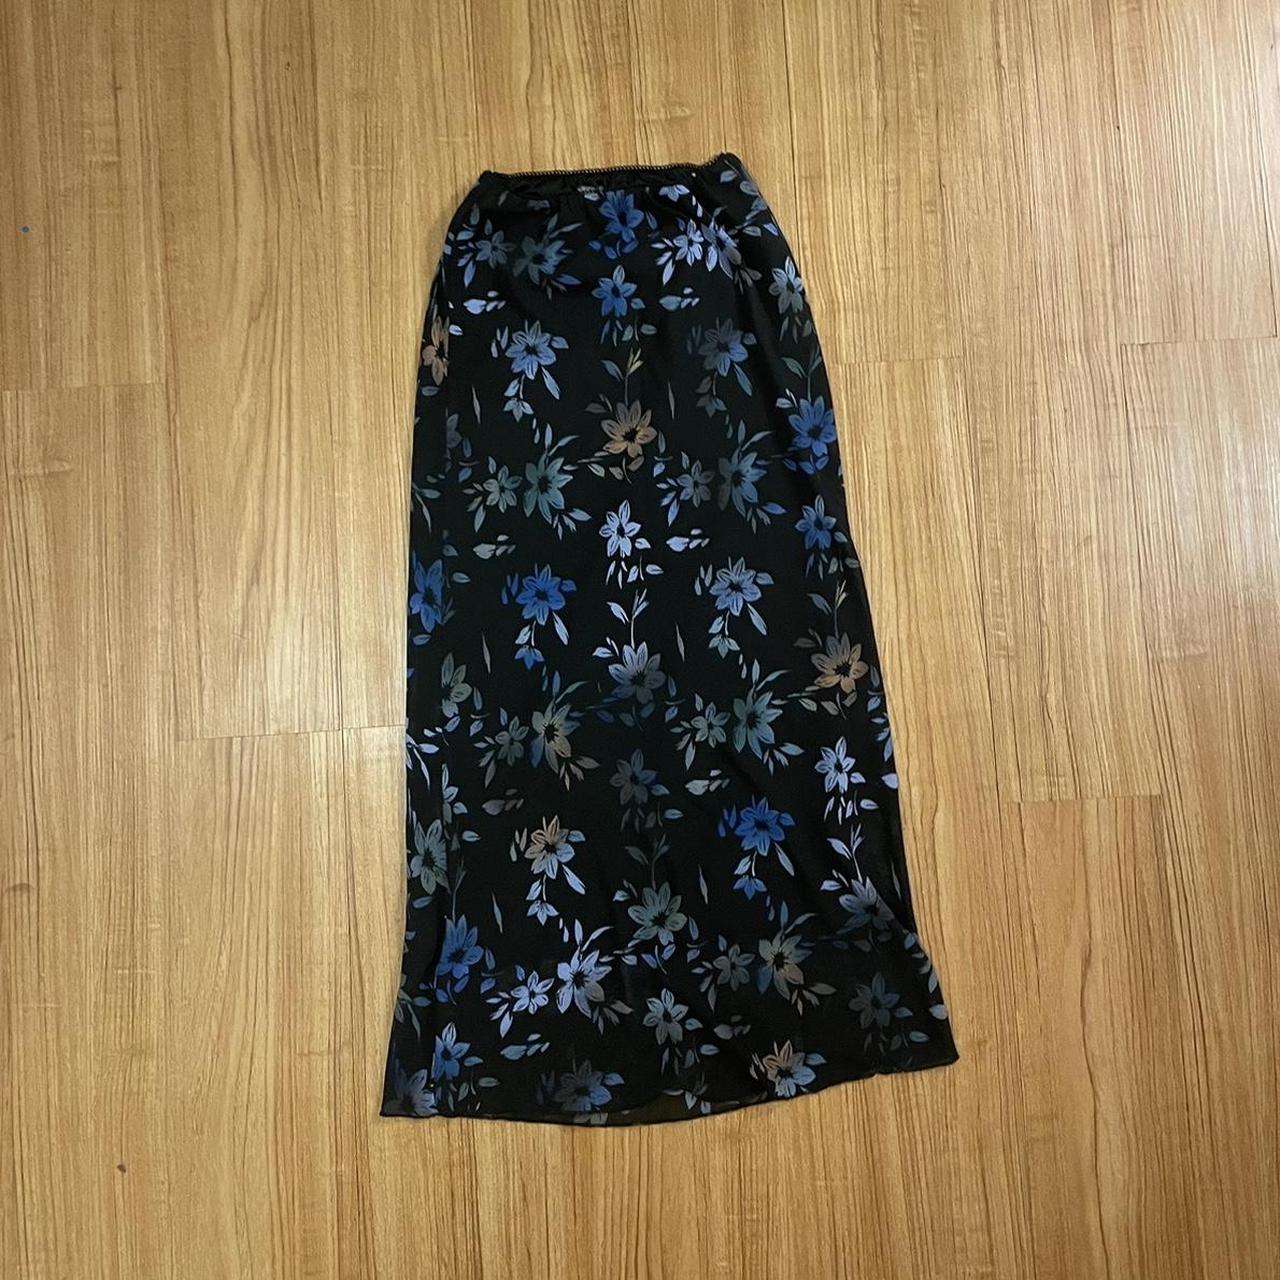 Wild Fable flower print long skirt Fits a small to... - Depop